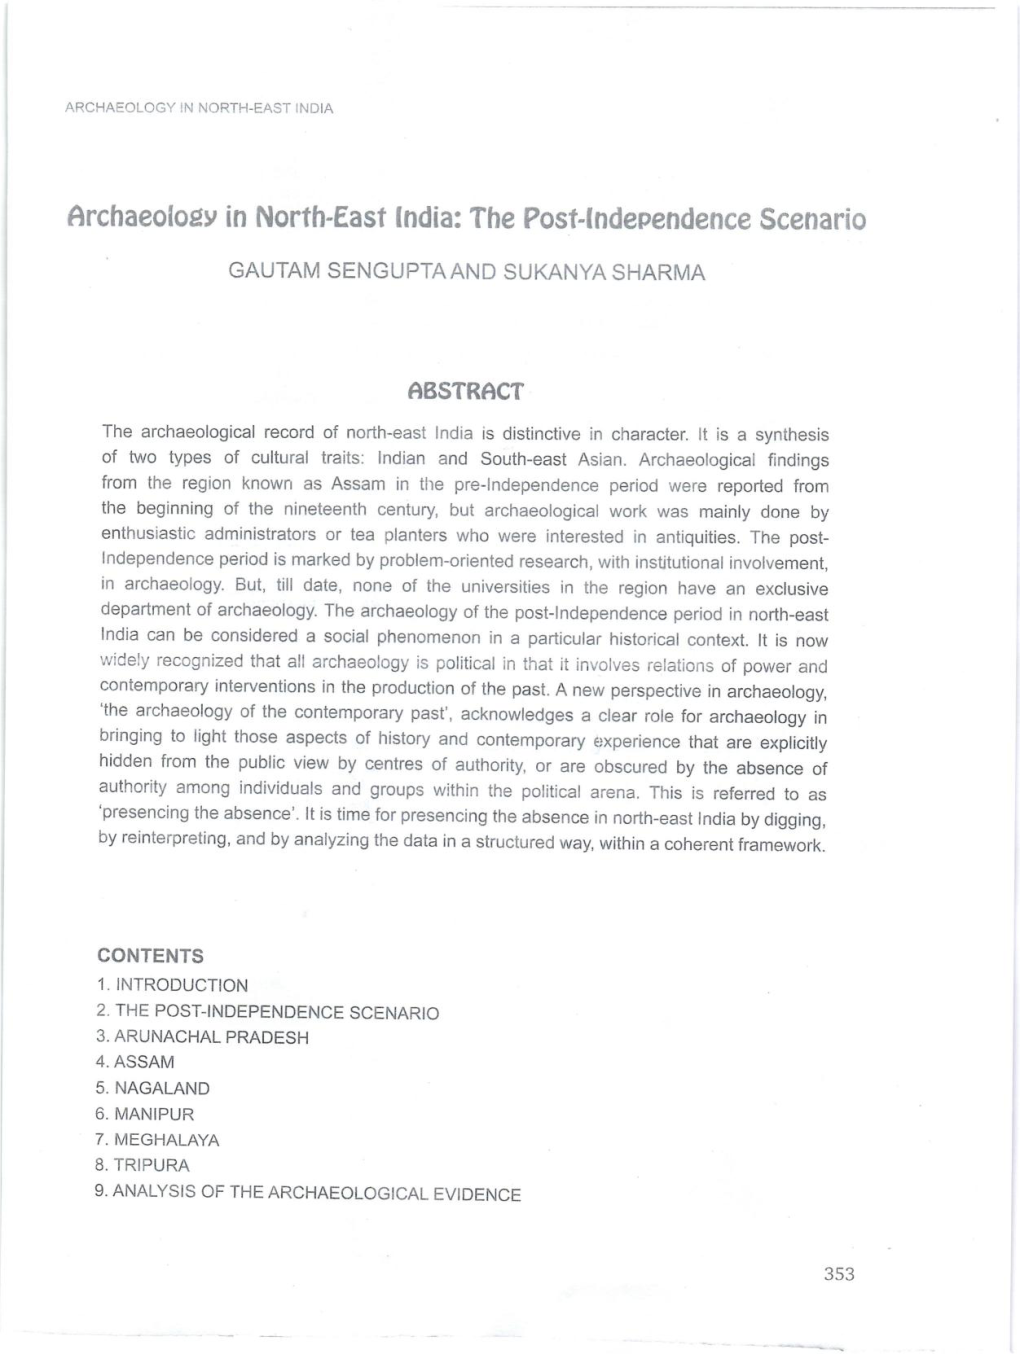 14. Archaeology in North-East India